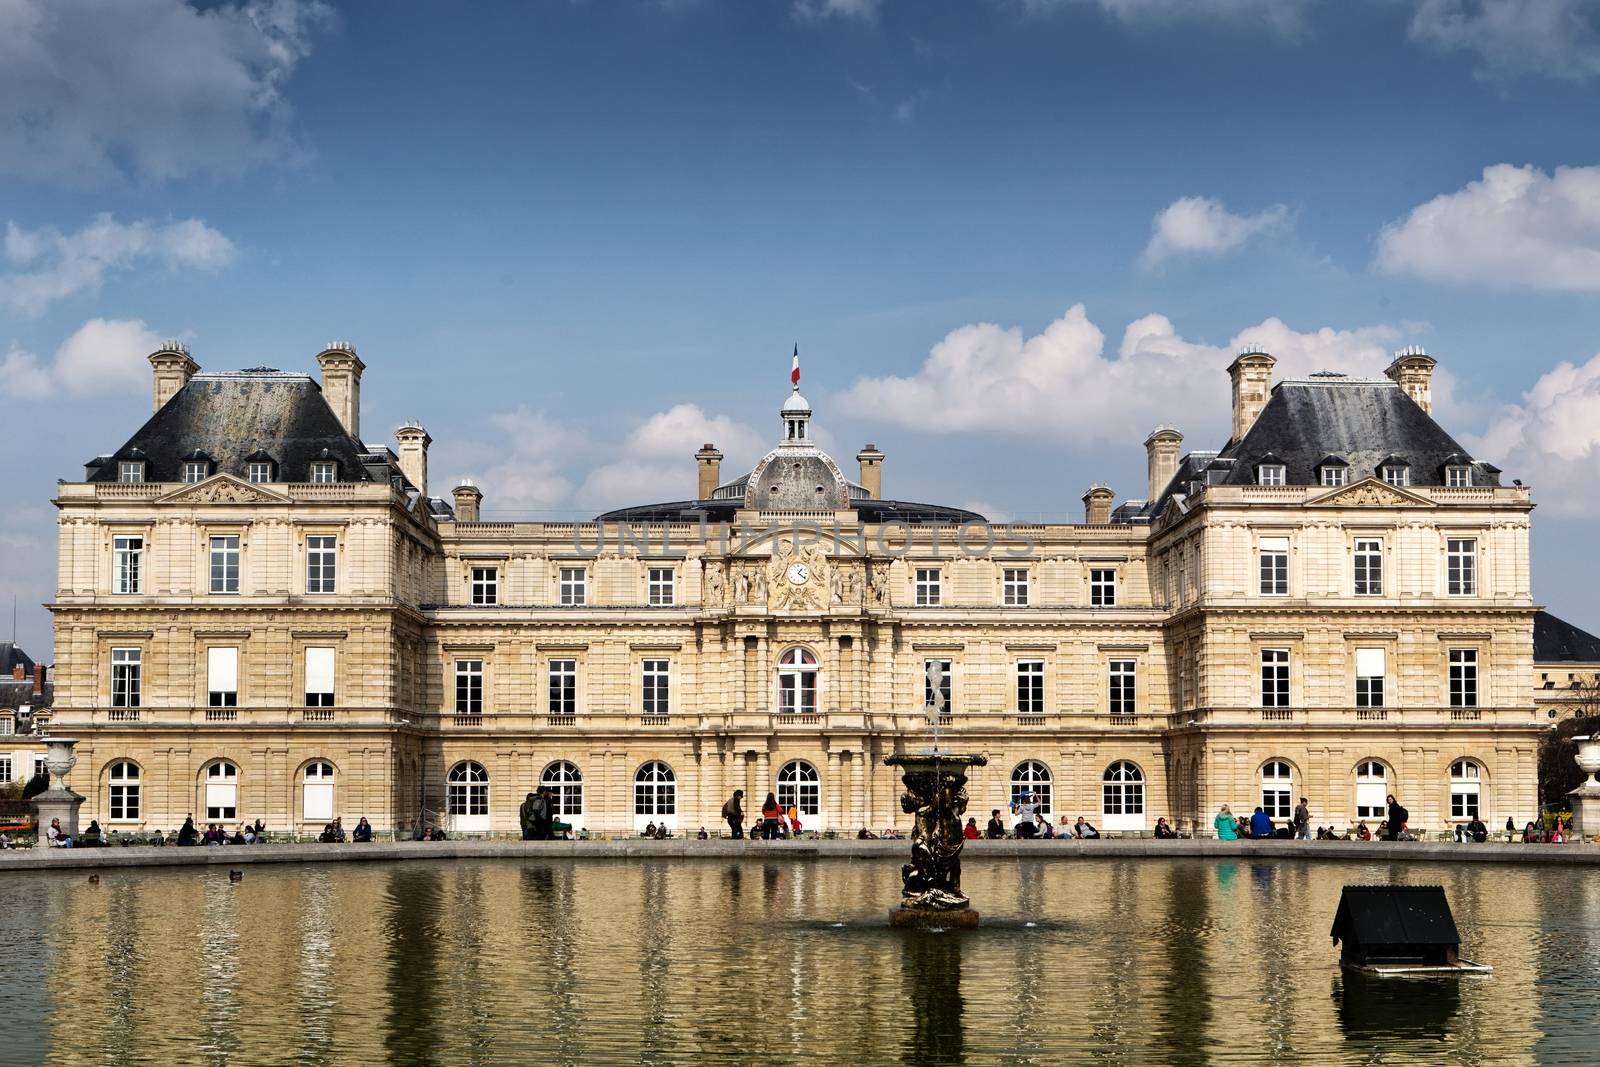 Luxemburg Palace in Paris, France by mitakag